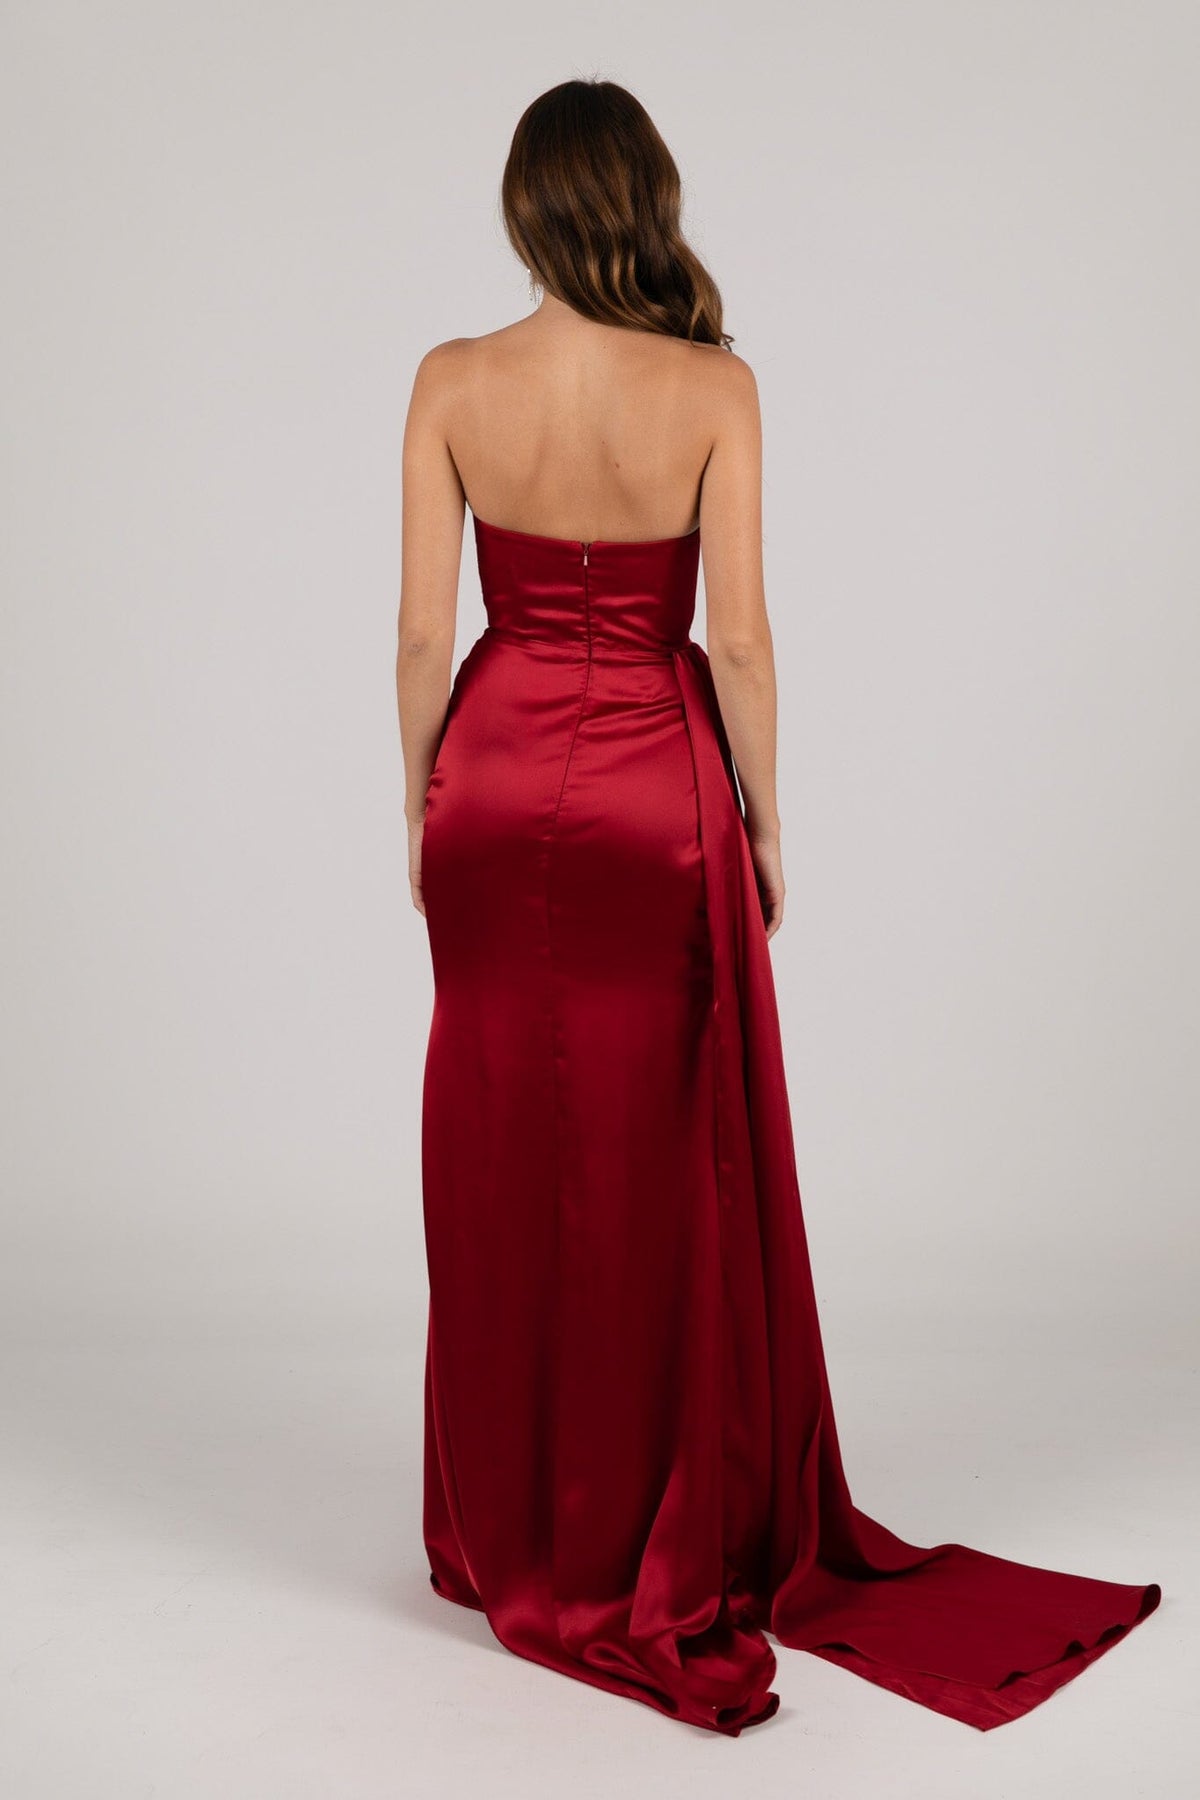 Half Open Back of Deep Red Satin Evening Gown with Strapless Bodice, Gathered Detail at Bust and Waist and High Side Slit